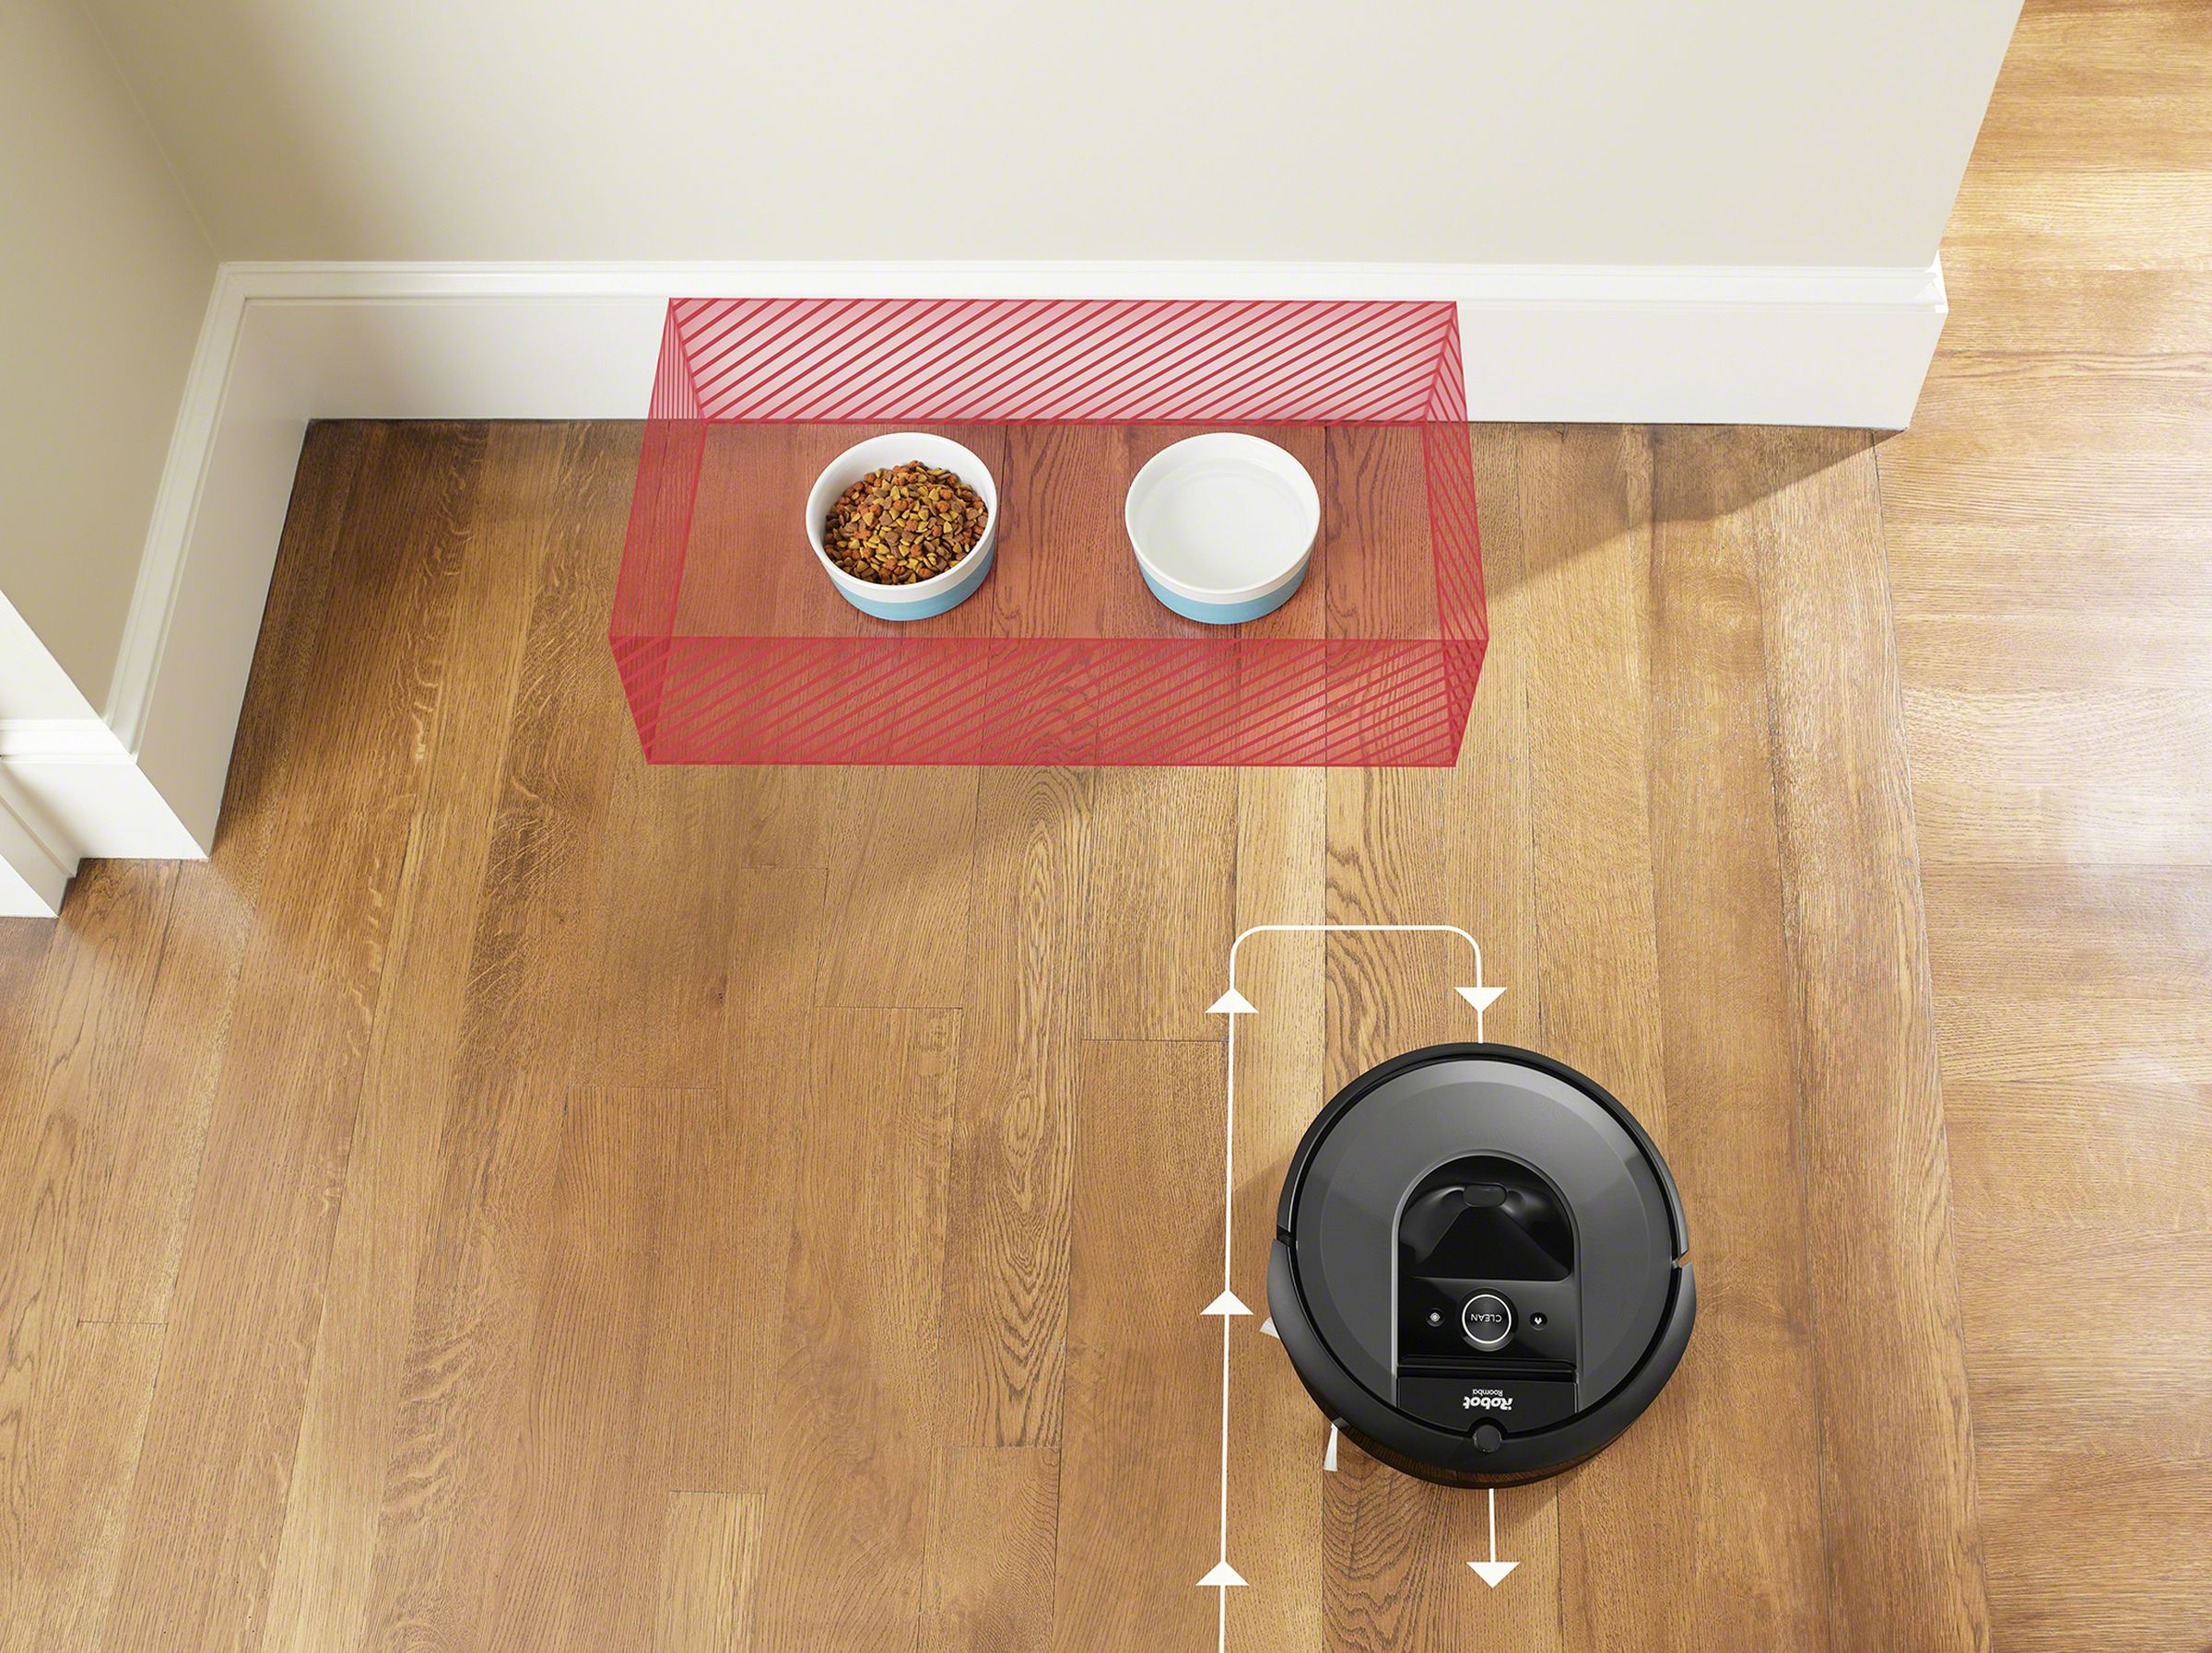 <em>Or you can set “no go zones” where you want the Roomba to always stay away from.</em>